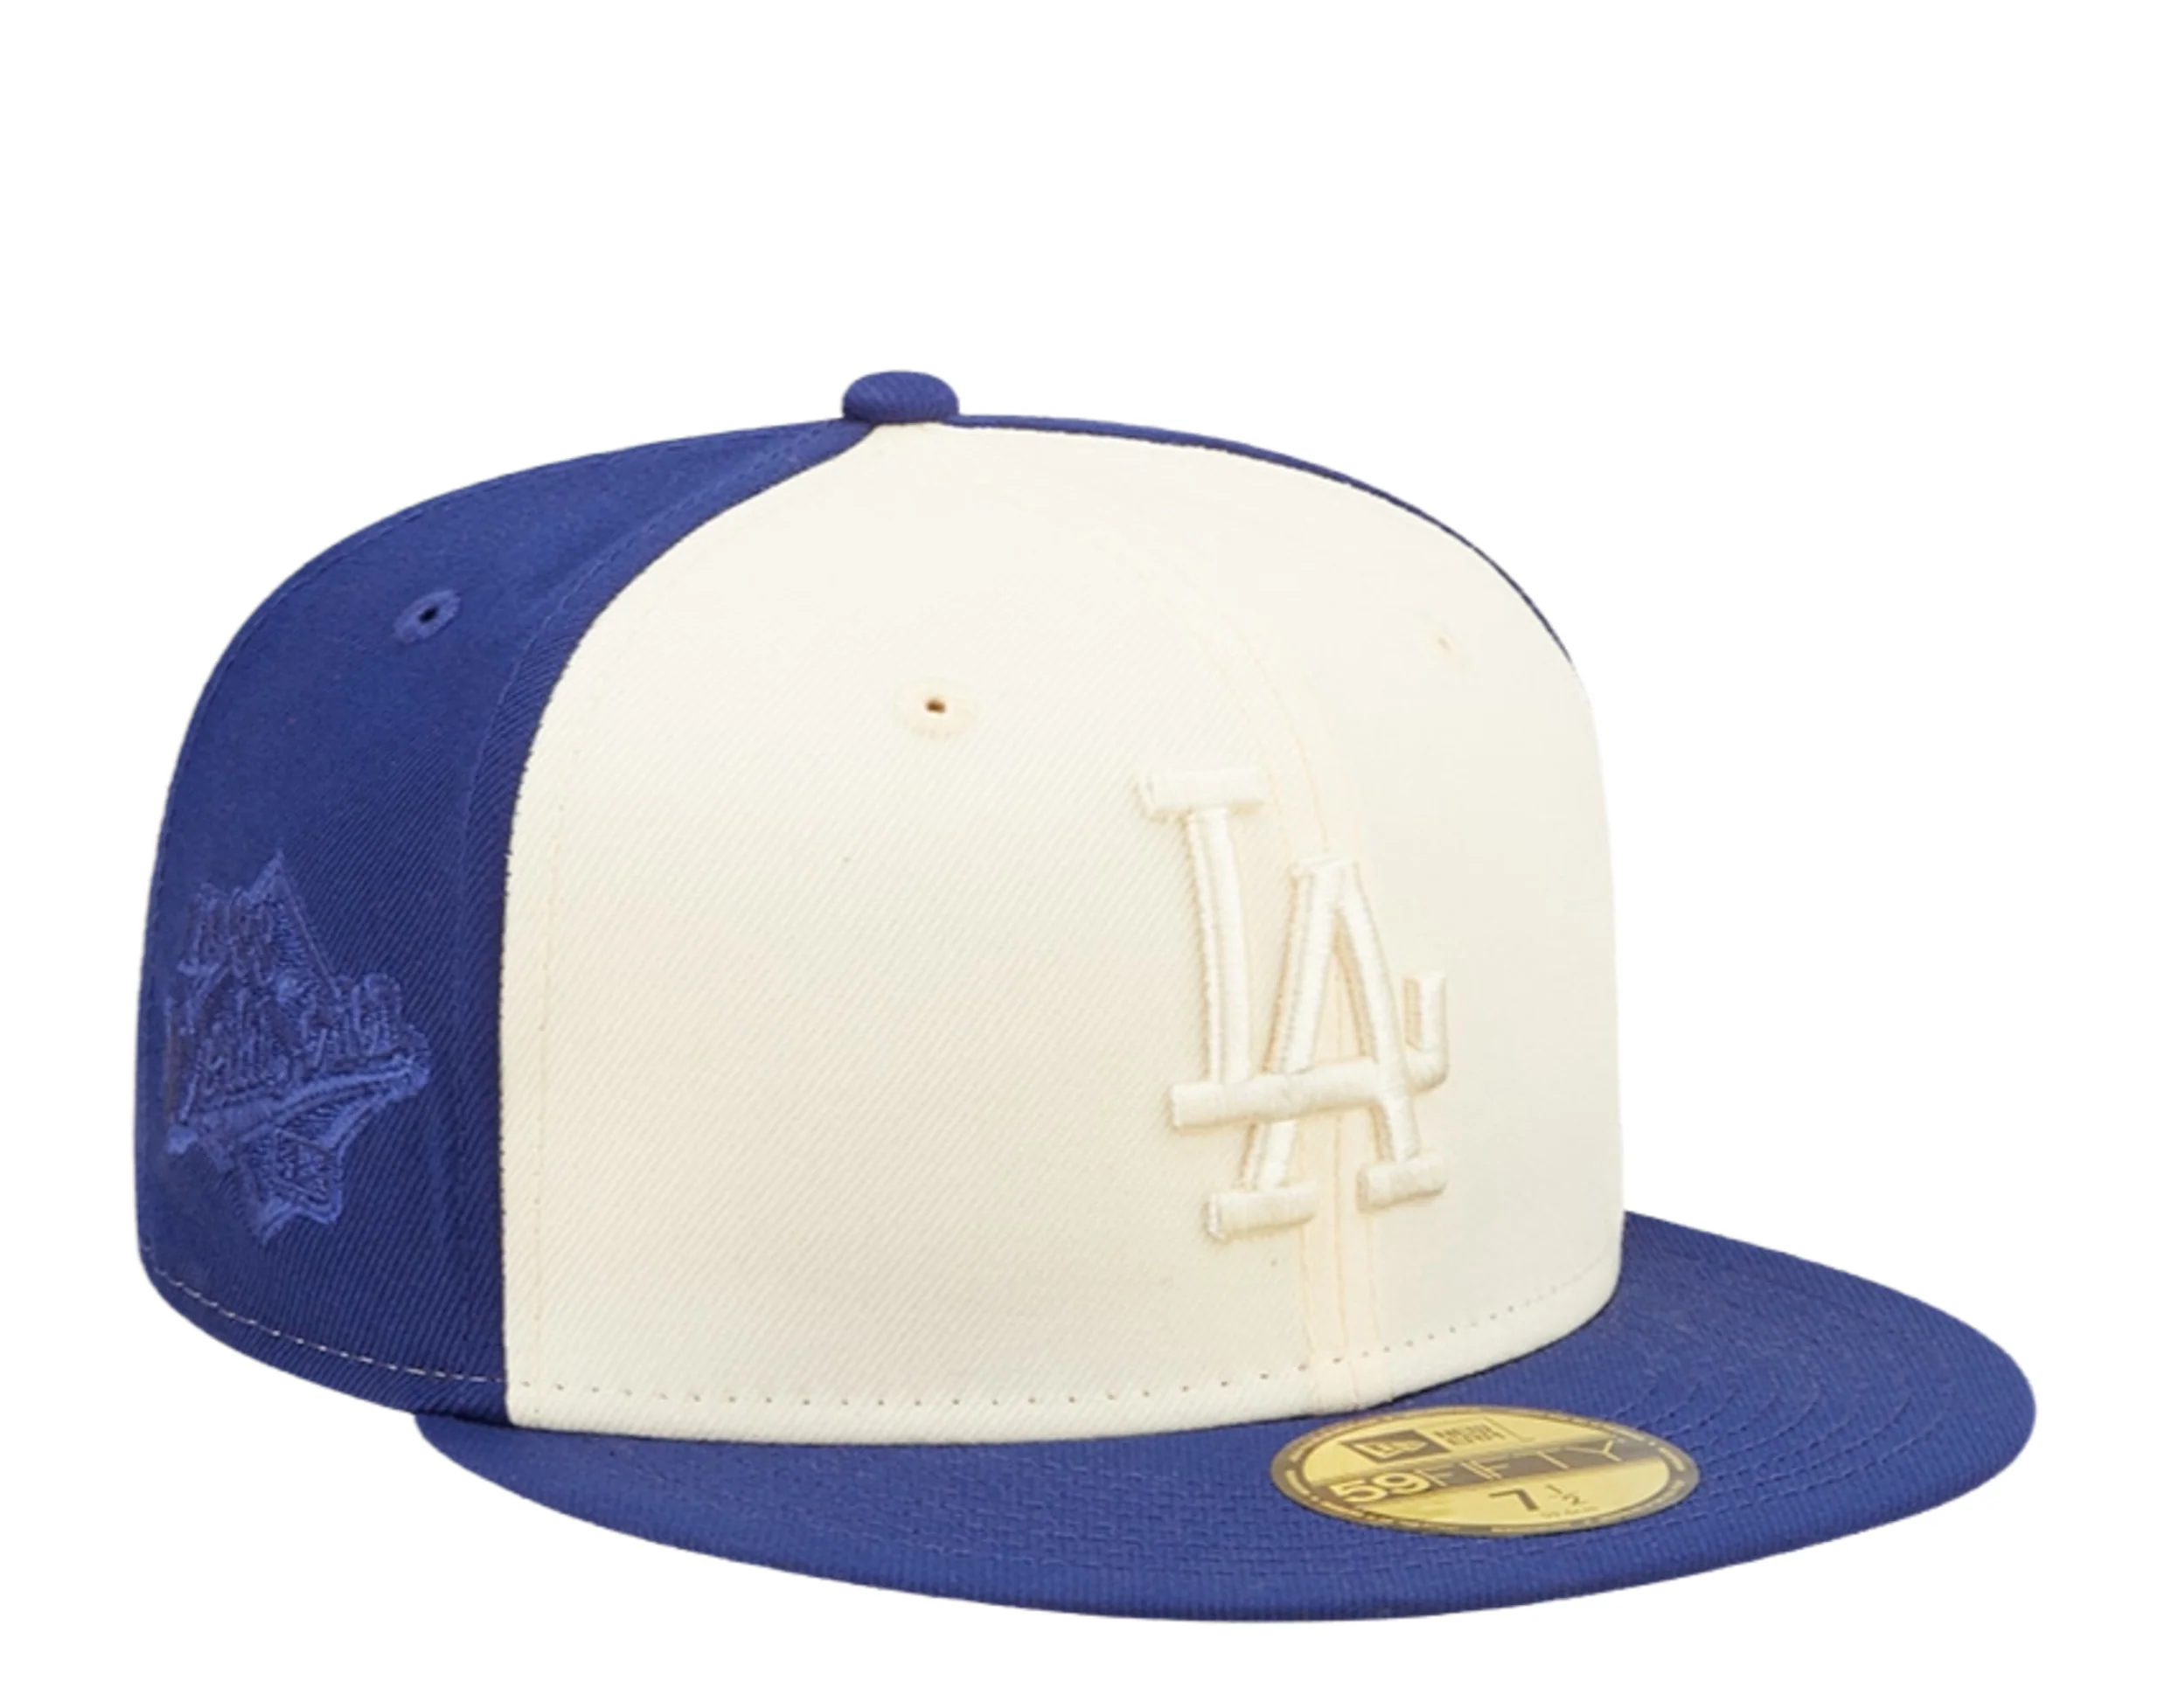 NEW ERA LOS ANGELES DODGERS 2-TONE 59FIFTY FITTED HAT-BLUE/CREAM